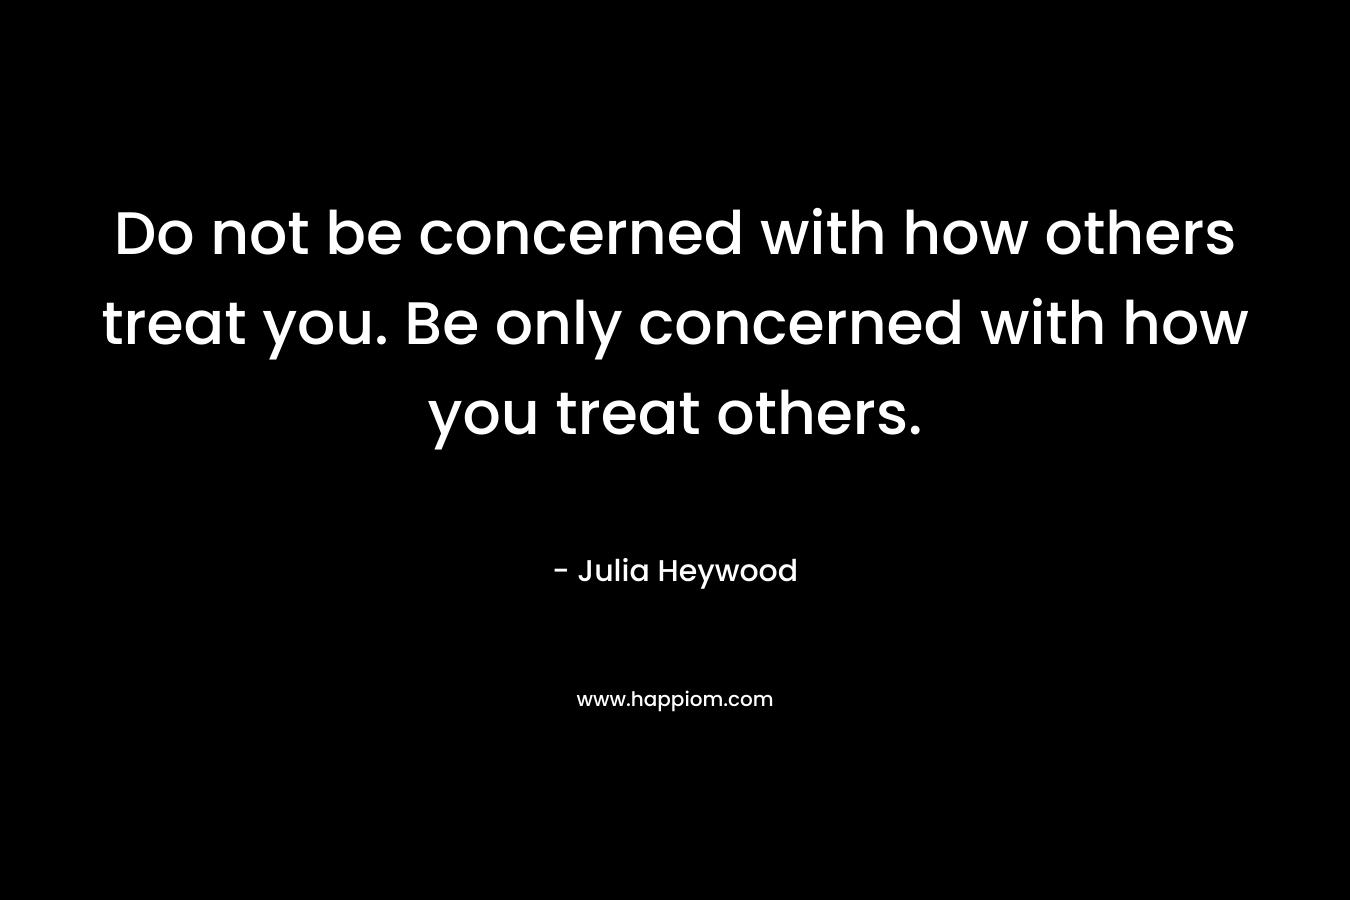 Do not be concerned with how others treat you. Be only concerned with how you treat others.